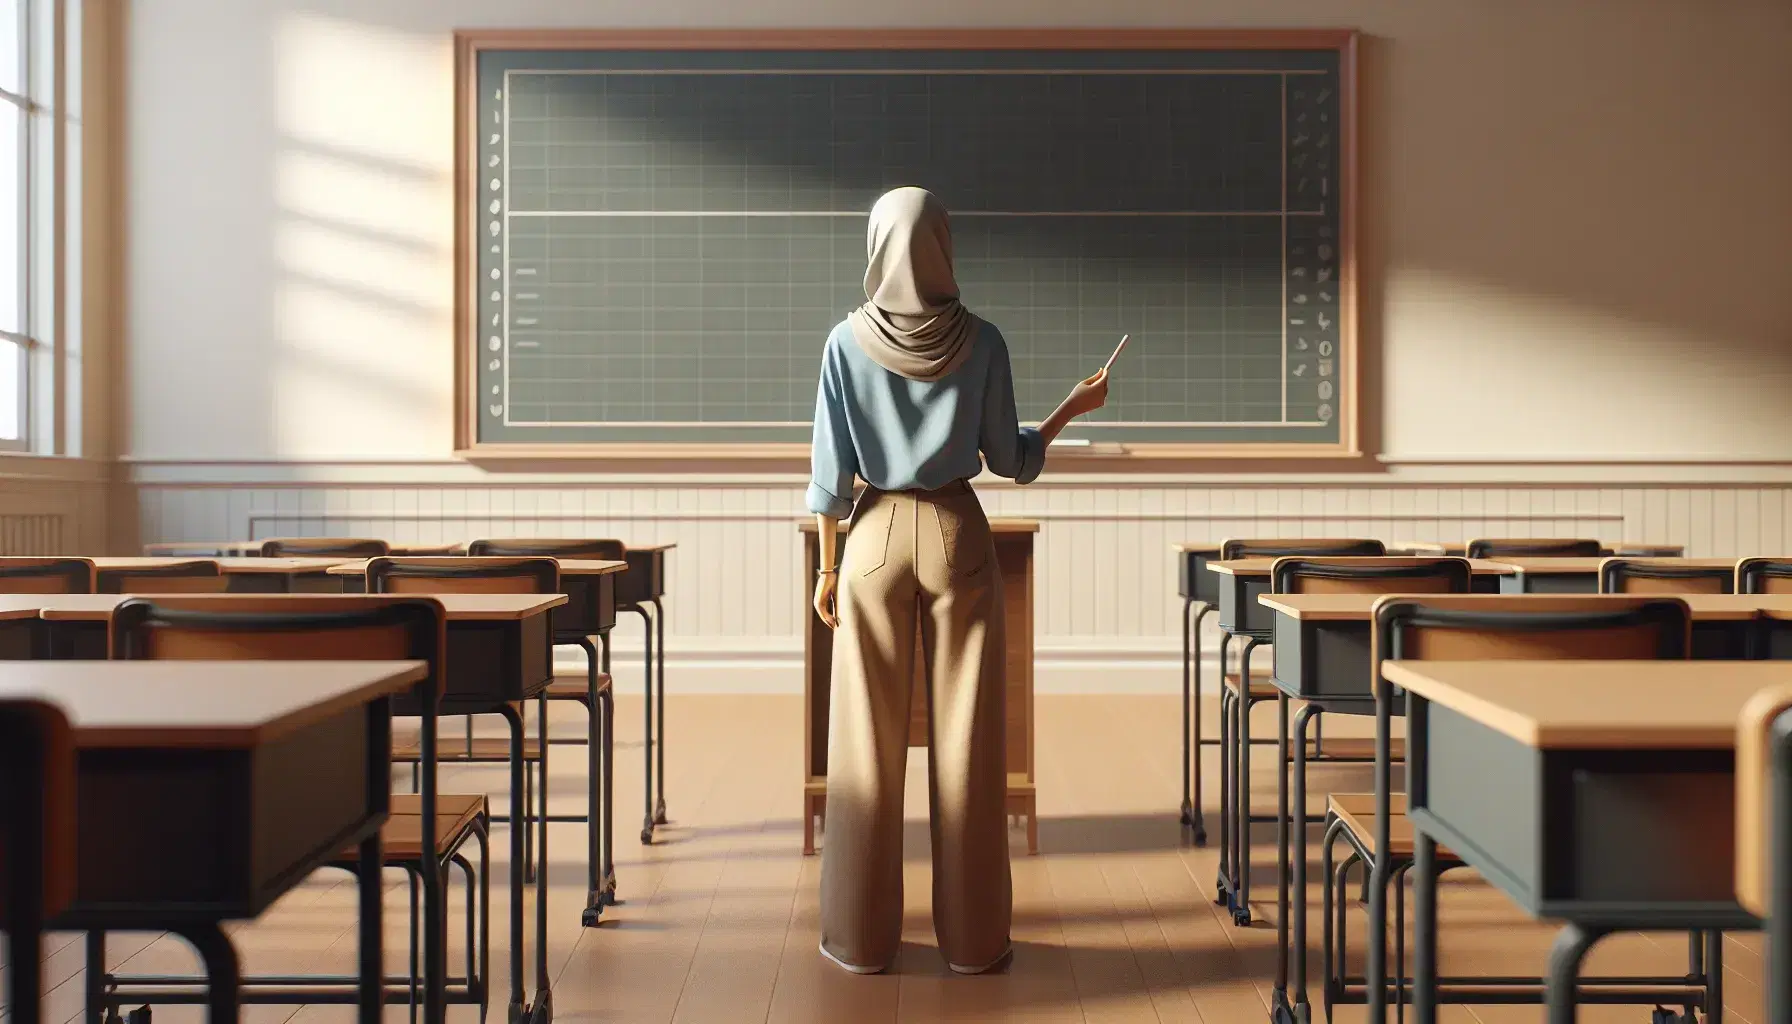 Middle-Eastern female teacher stands before a blank chalkboard in a classroom, holding chalk, with rows of empty desks, ready to begin a lesson.